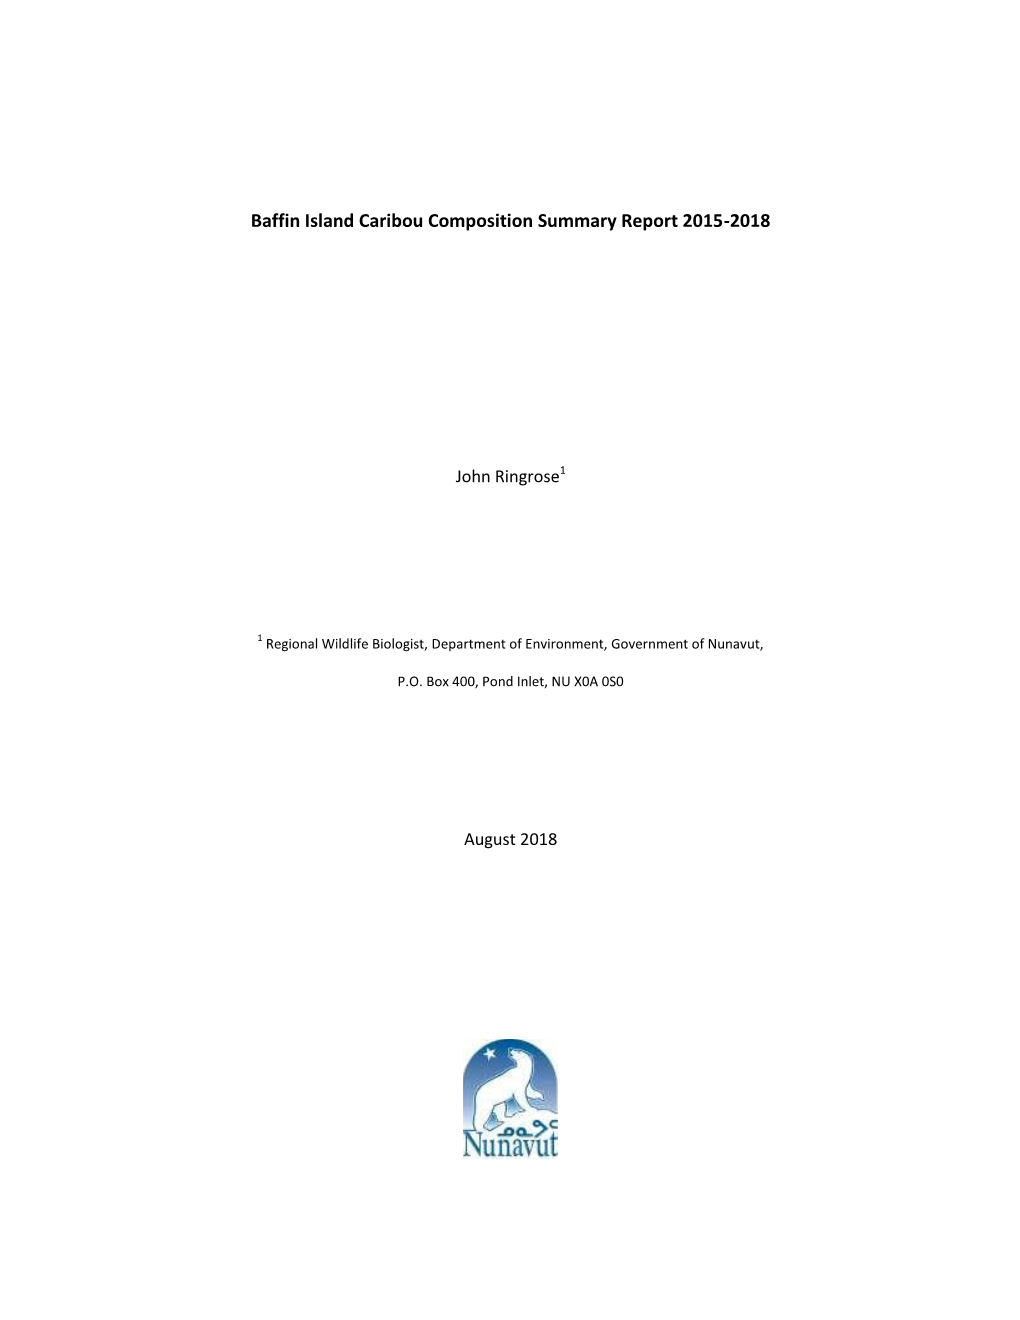 Baffin Island Caribou Composition Summary Report 2015-2018